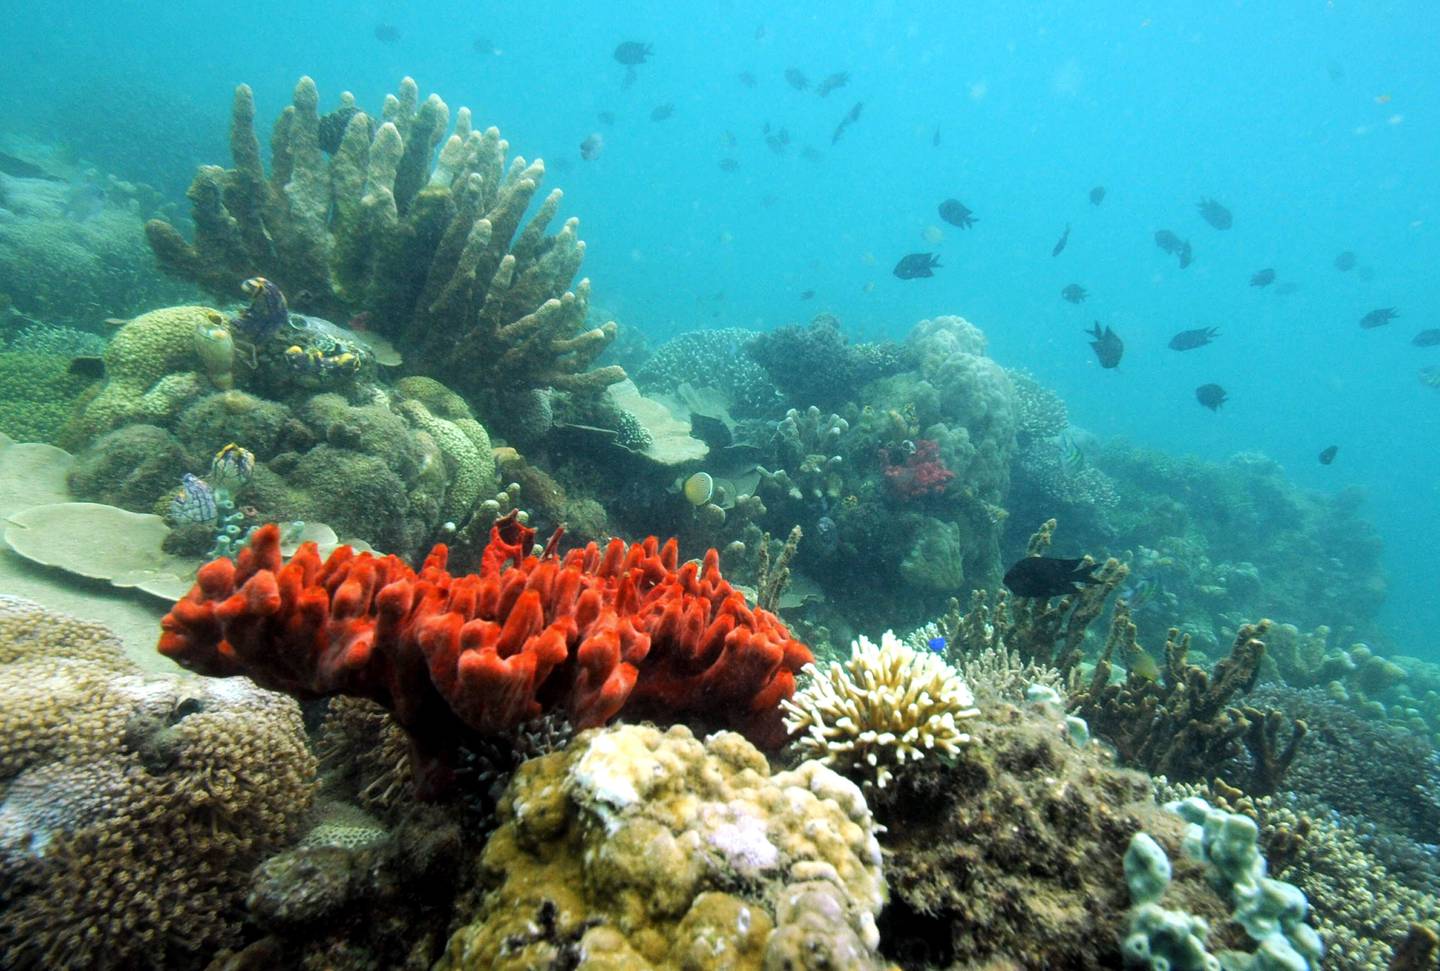 Rising ocean temperatures could have devastating consequences for marine life.